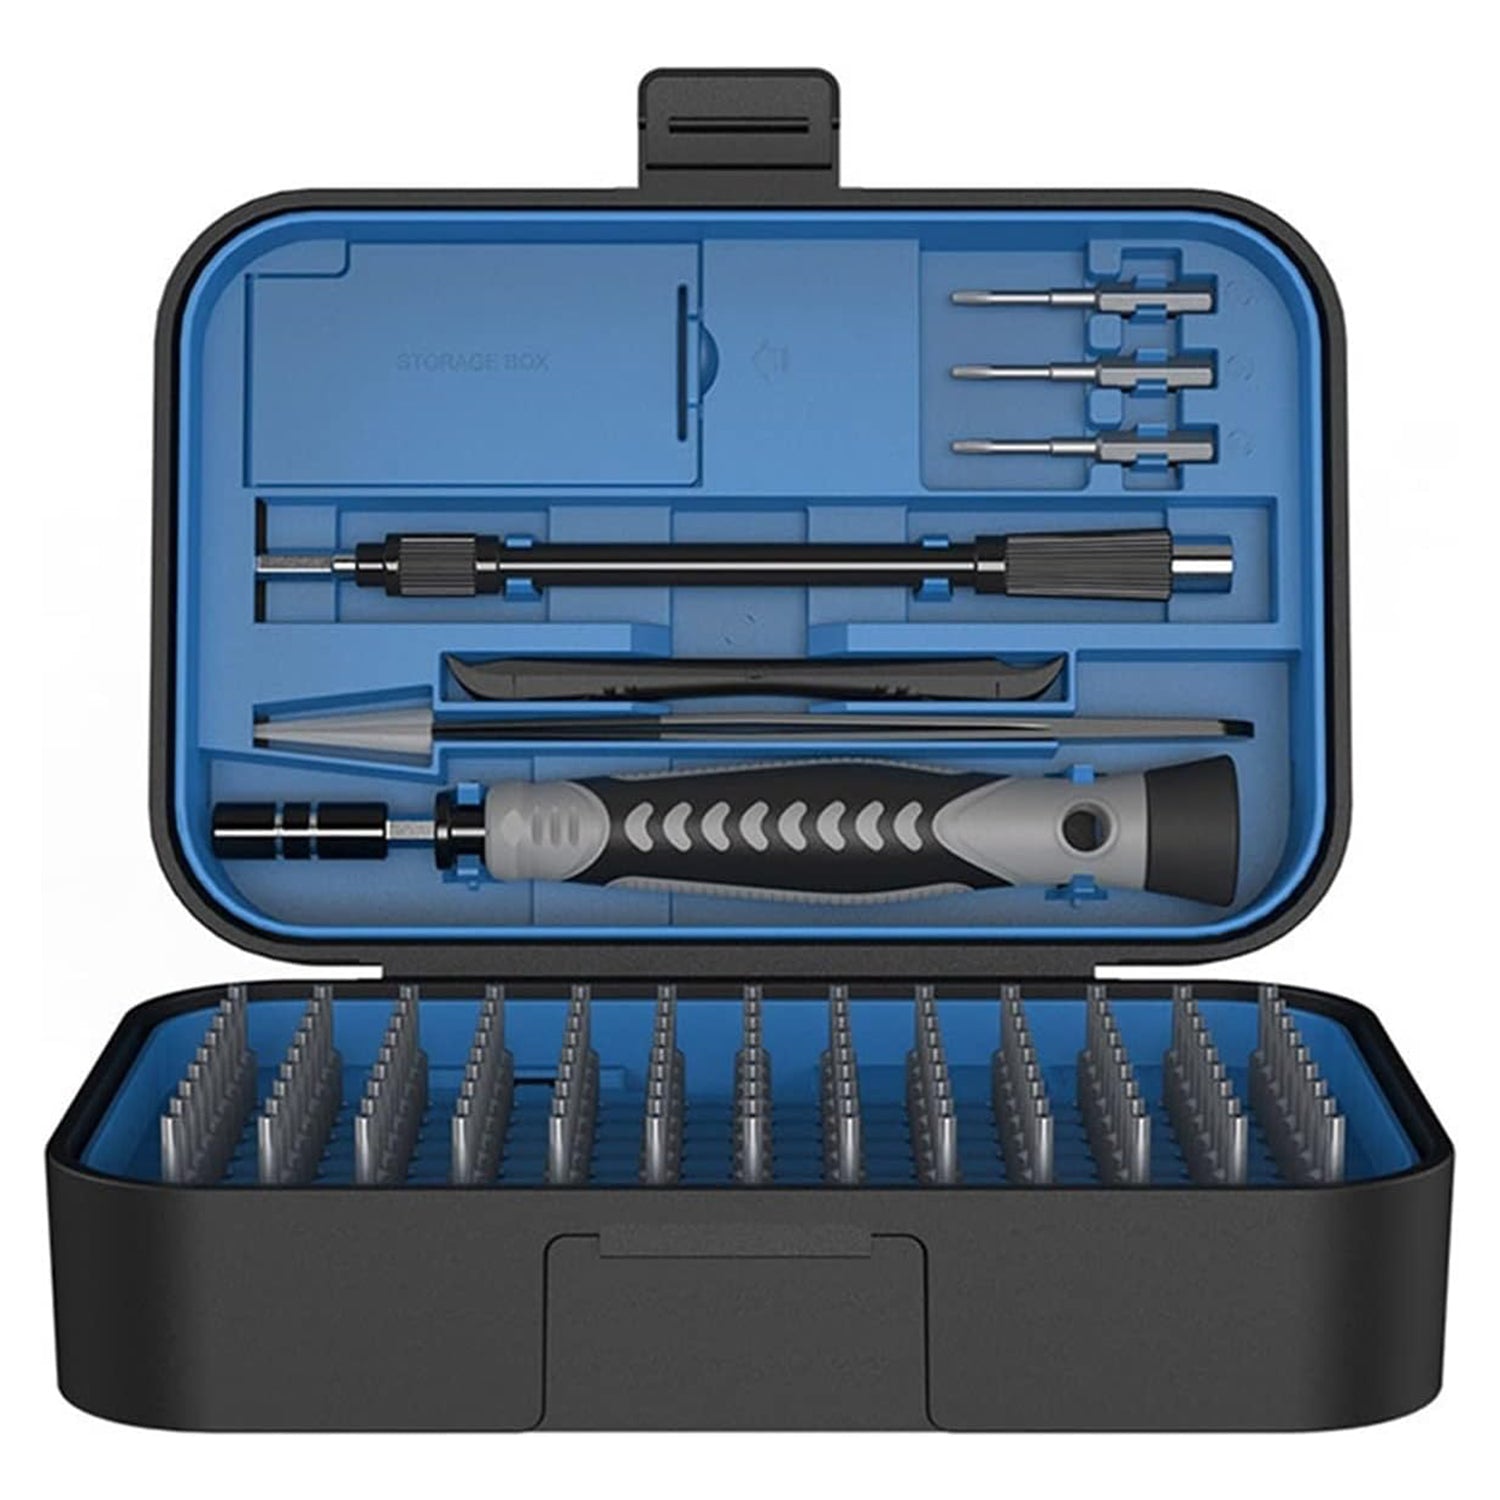 130-in-1 Precision Screwdriver Set for Mobile Phones, Laptops, Tablets, Computers, and Home Repair